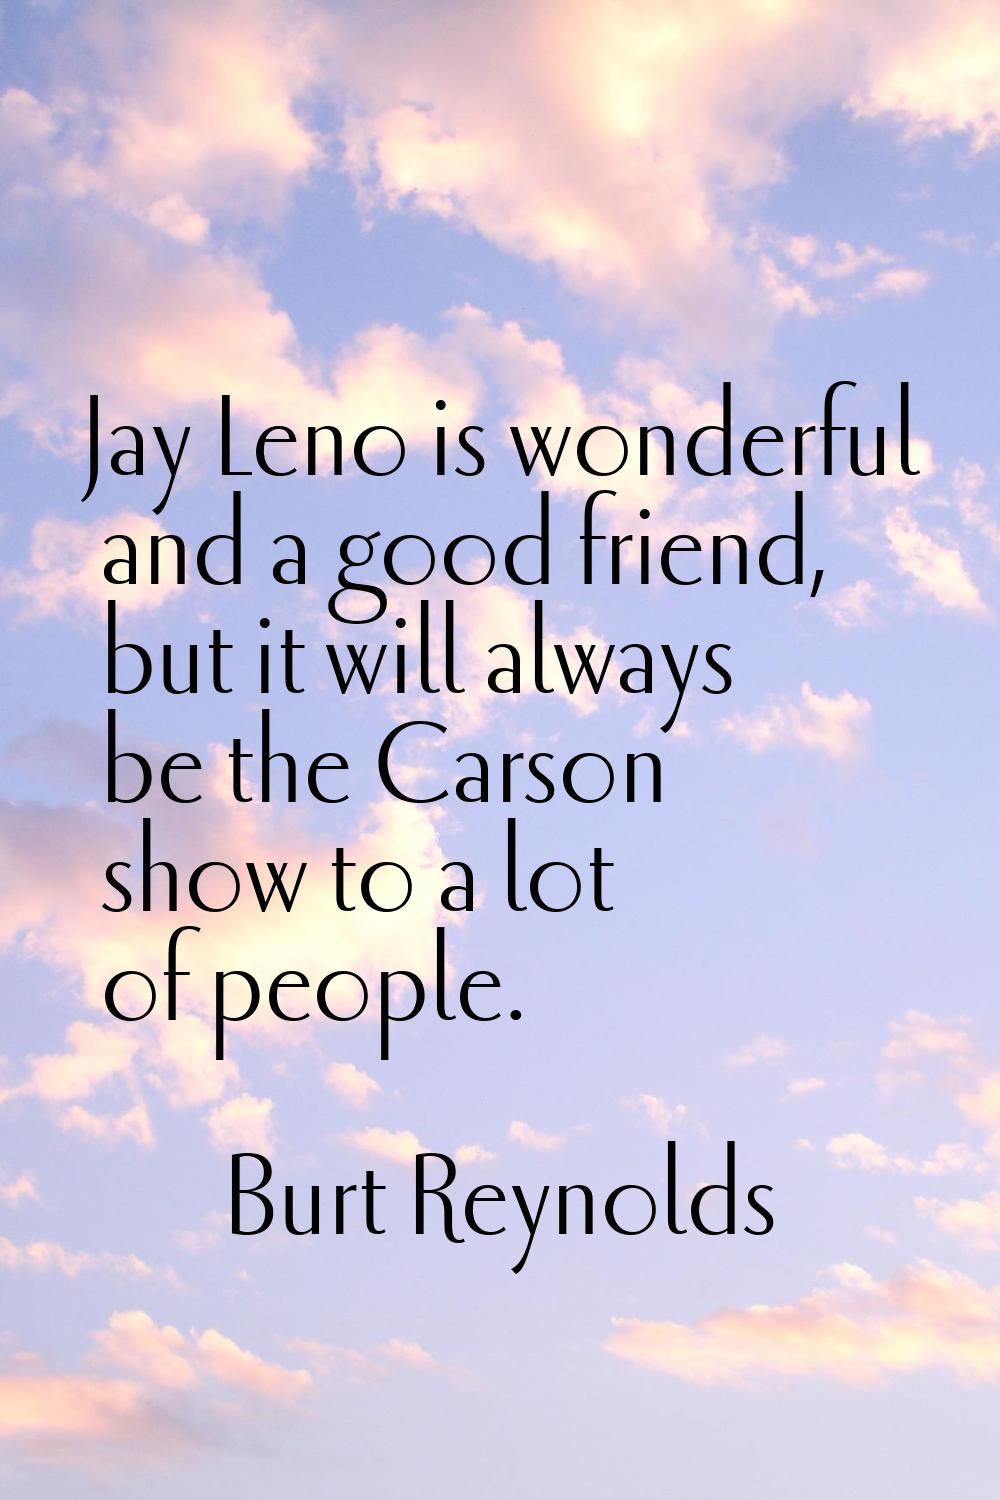 Jay Leno is wonderful and a good friend, but it will always be the Carson show to a lot of people.